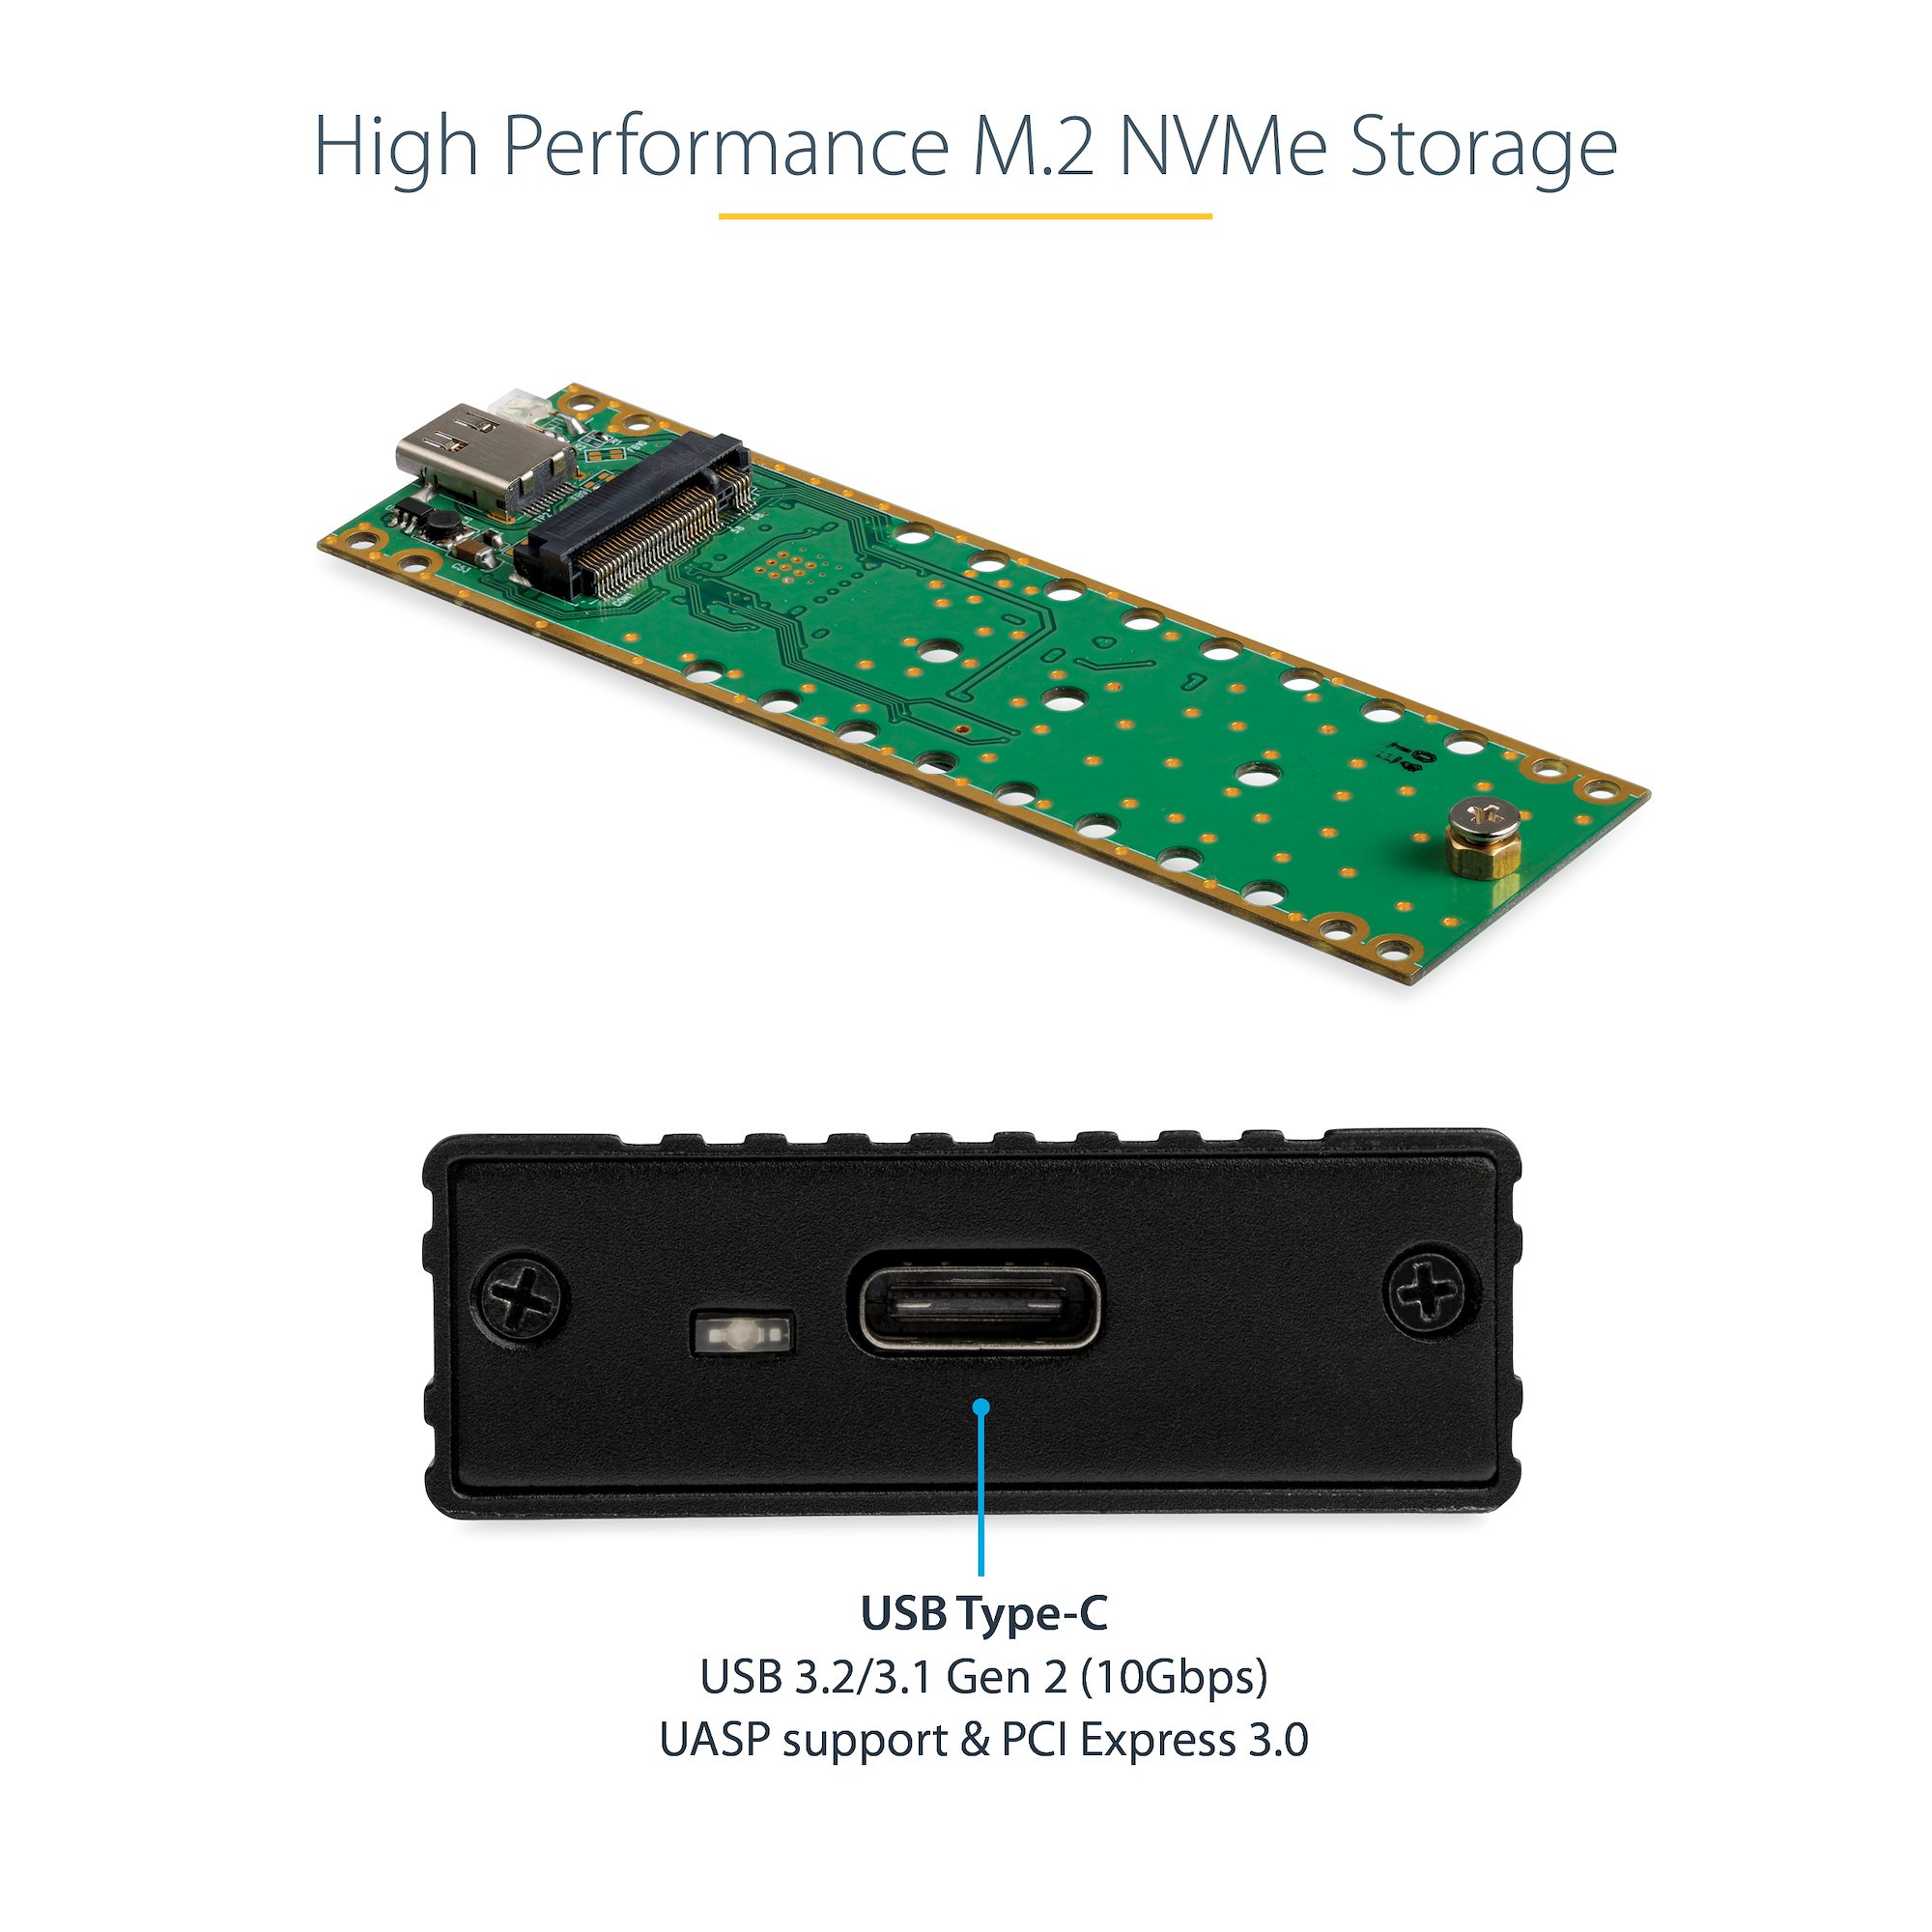 USB-C 10Gbps to M.2 NVMe SSD Enclosure - Portable External M.2 NGFF PCIe  Aluminum Case - 1GB/s Read/Write - Supports 2230, 2242, 2260, 2280 - TB3